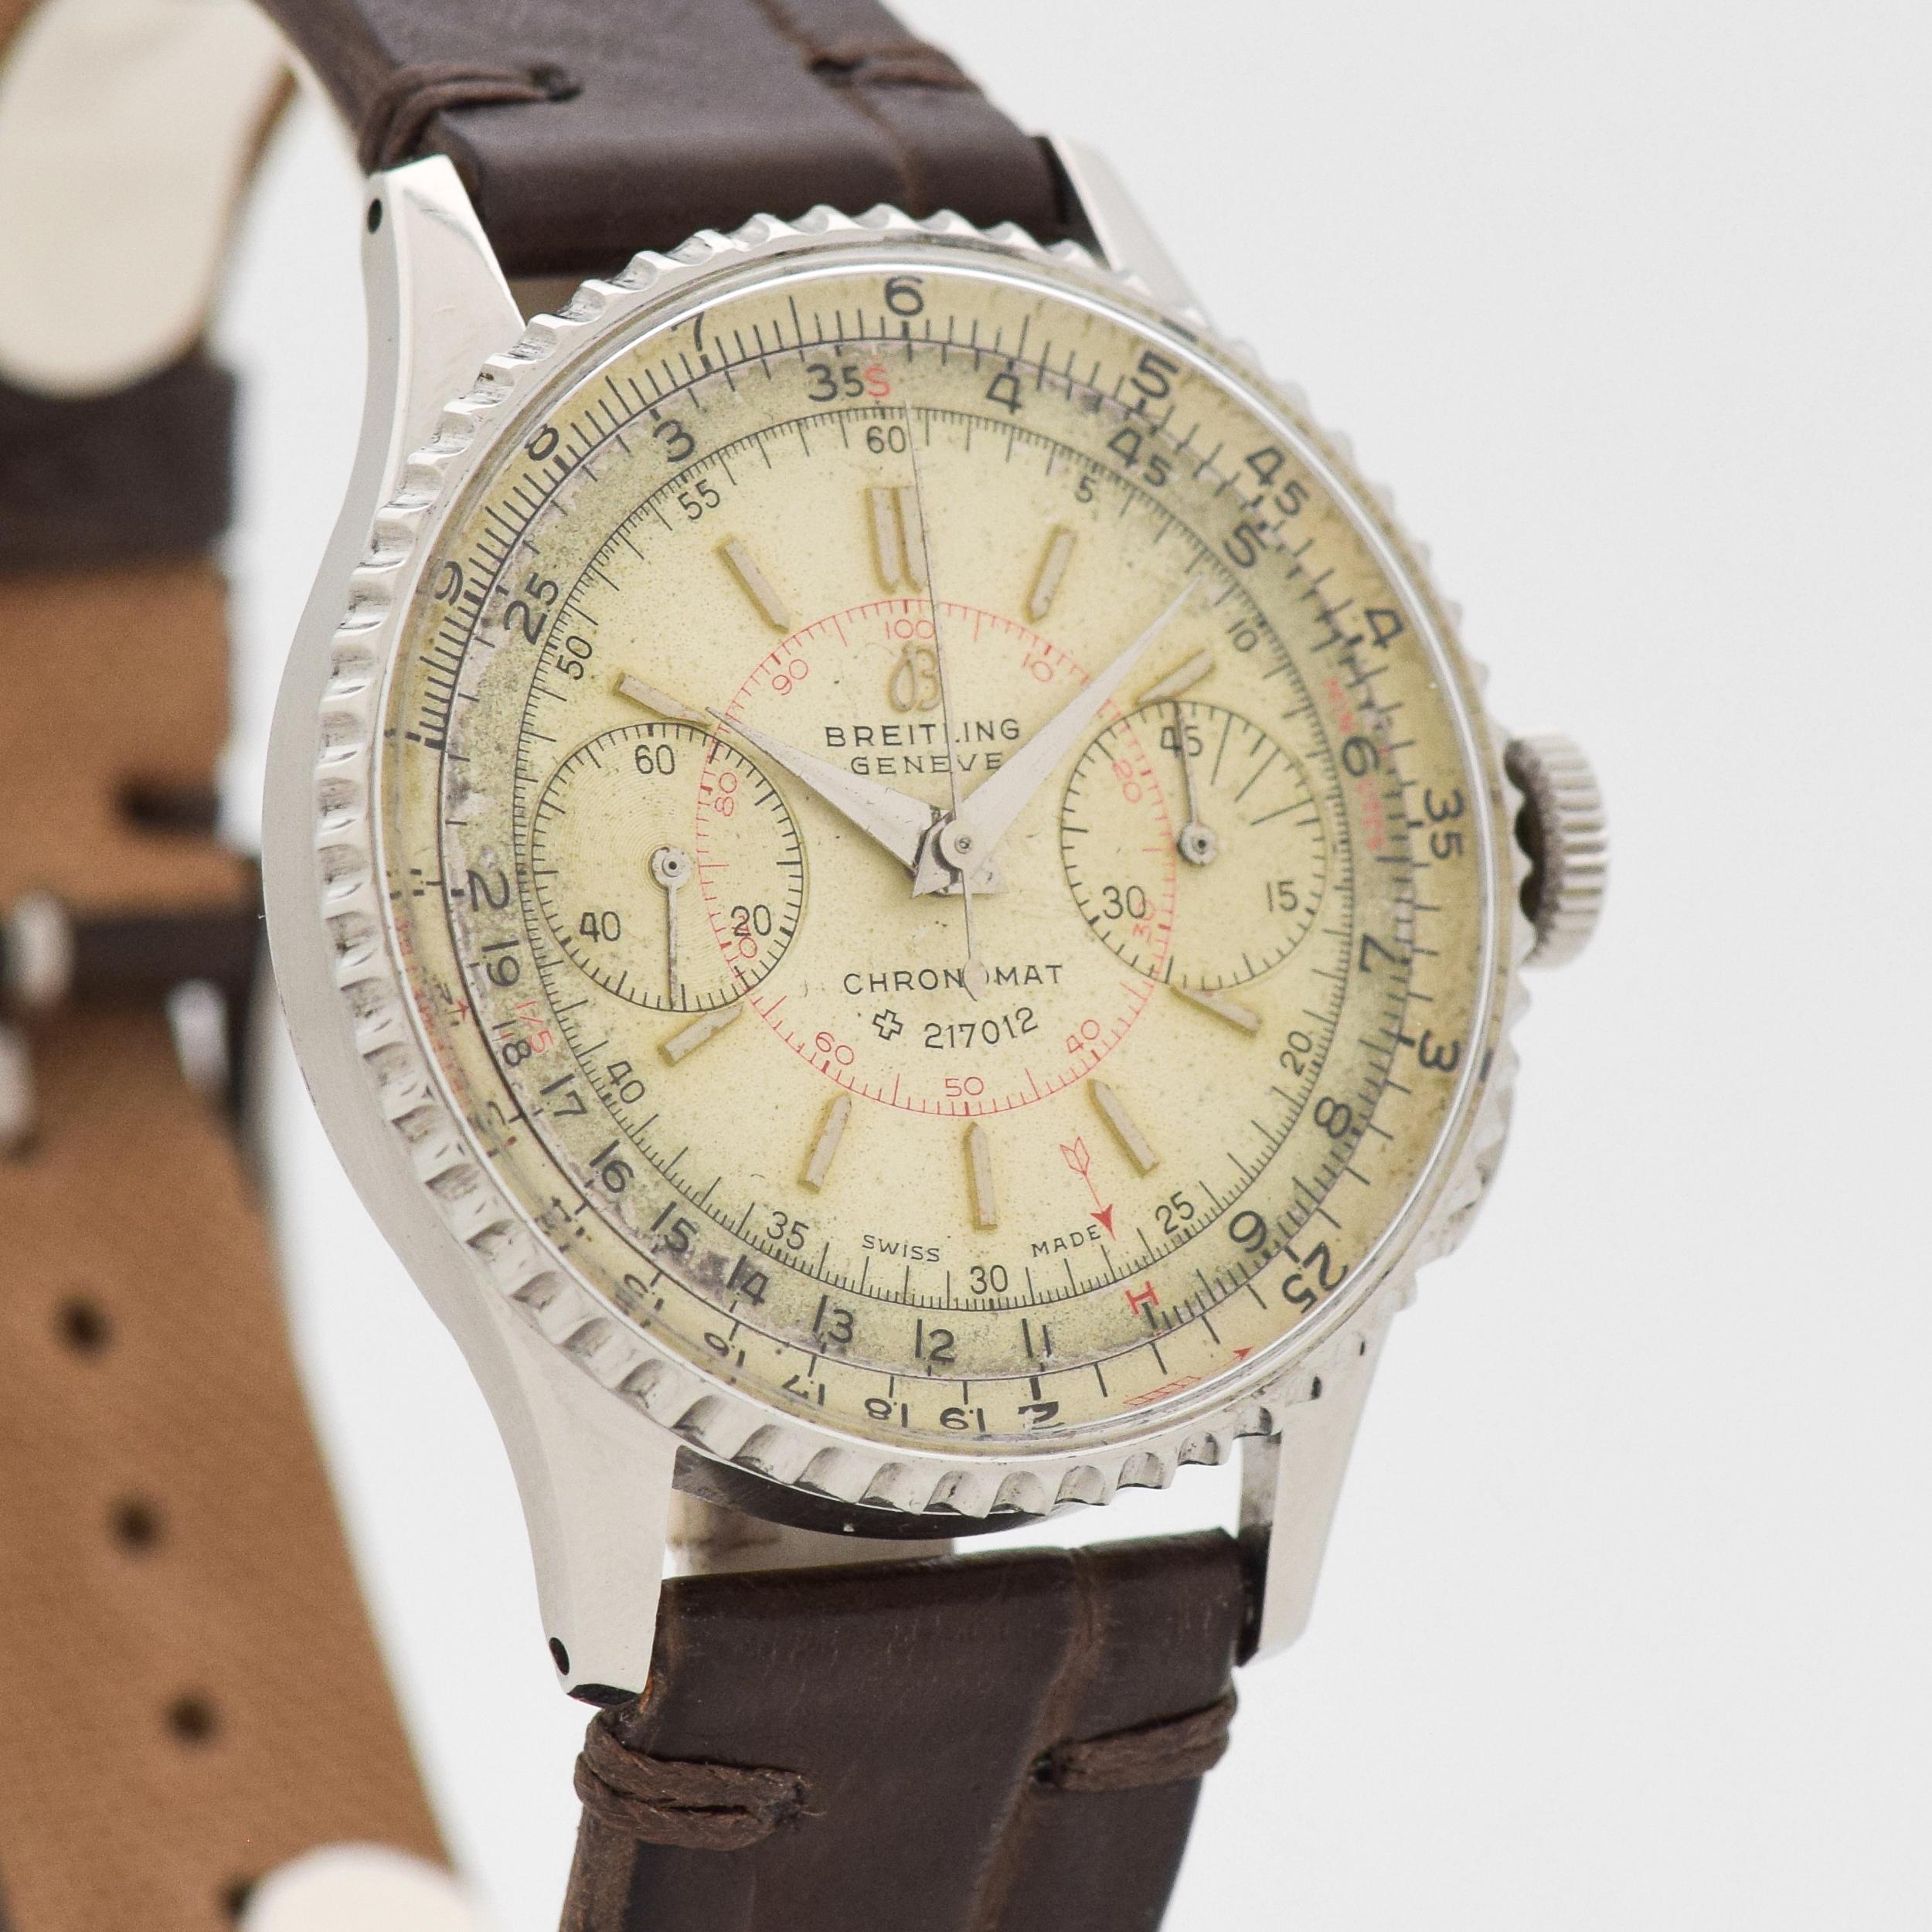 1947 Vintage Breitling Chronomat Ref. 769 / 217012 1st Generation Stainless Steel watch with Original Silver Dial with Applied Steel Beveled Pointed Tip Stick/Bar/Baton Markers. Case Size, 34mm x 40mm lug to lug (1.34 in. x 1.57 in.) - Powered by a